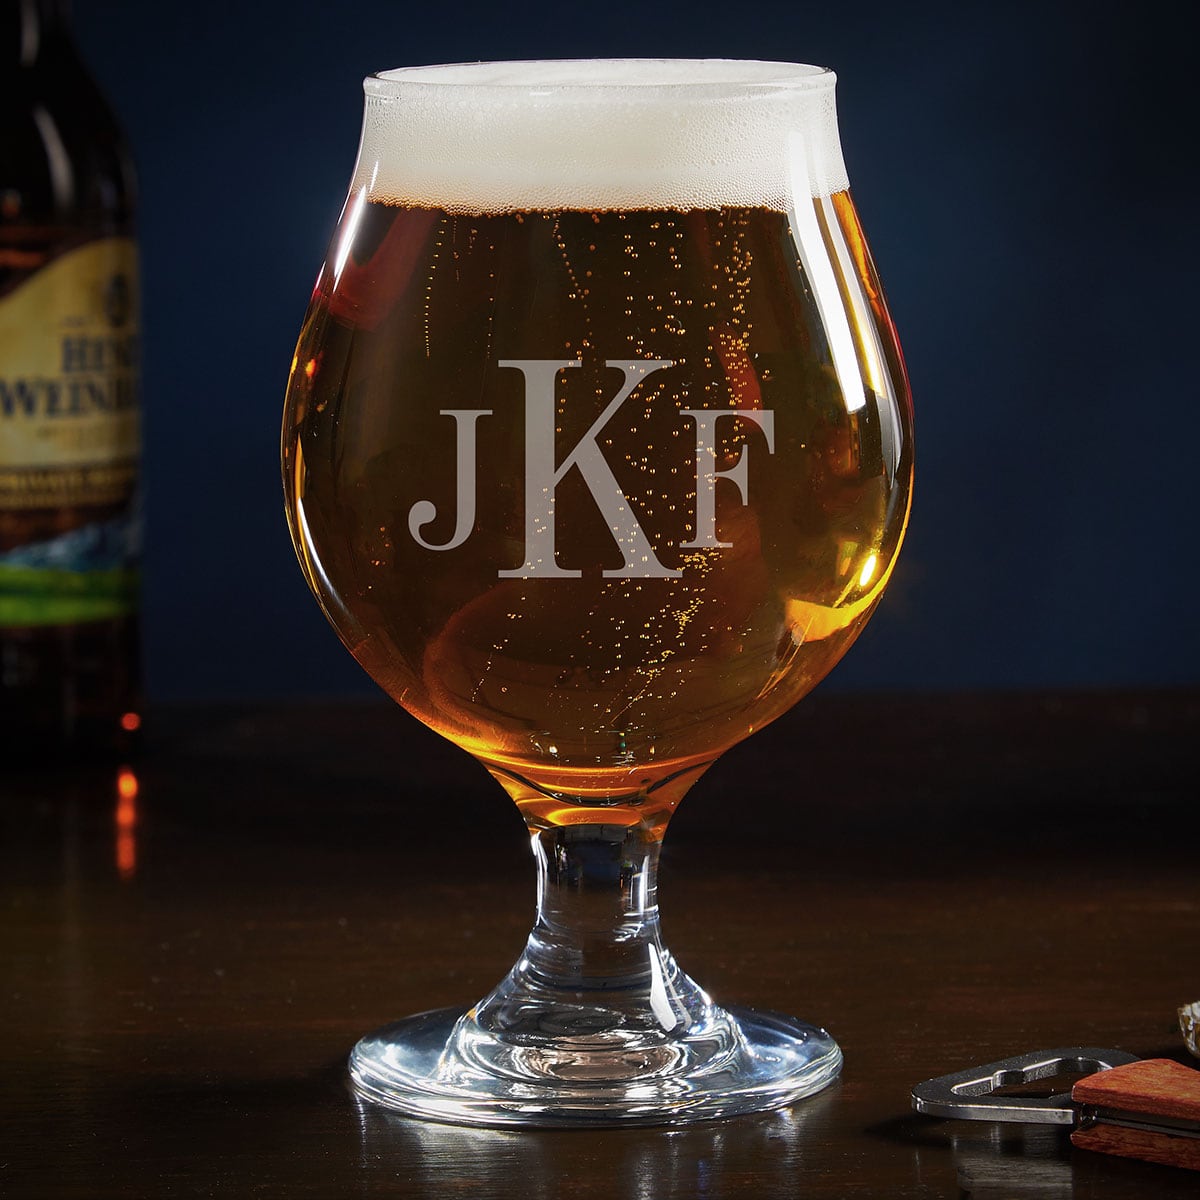 Snifter Beer Glass